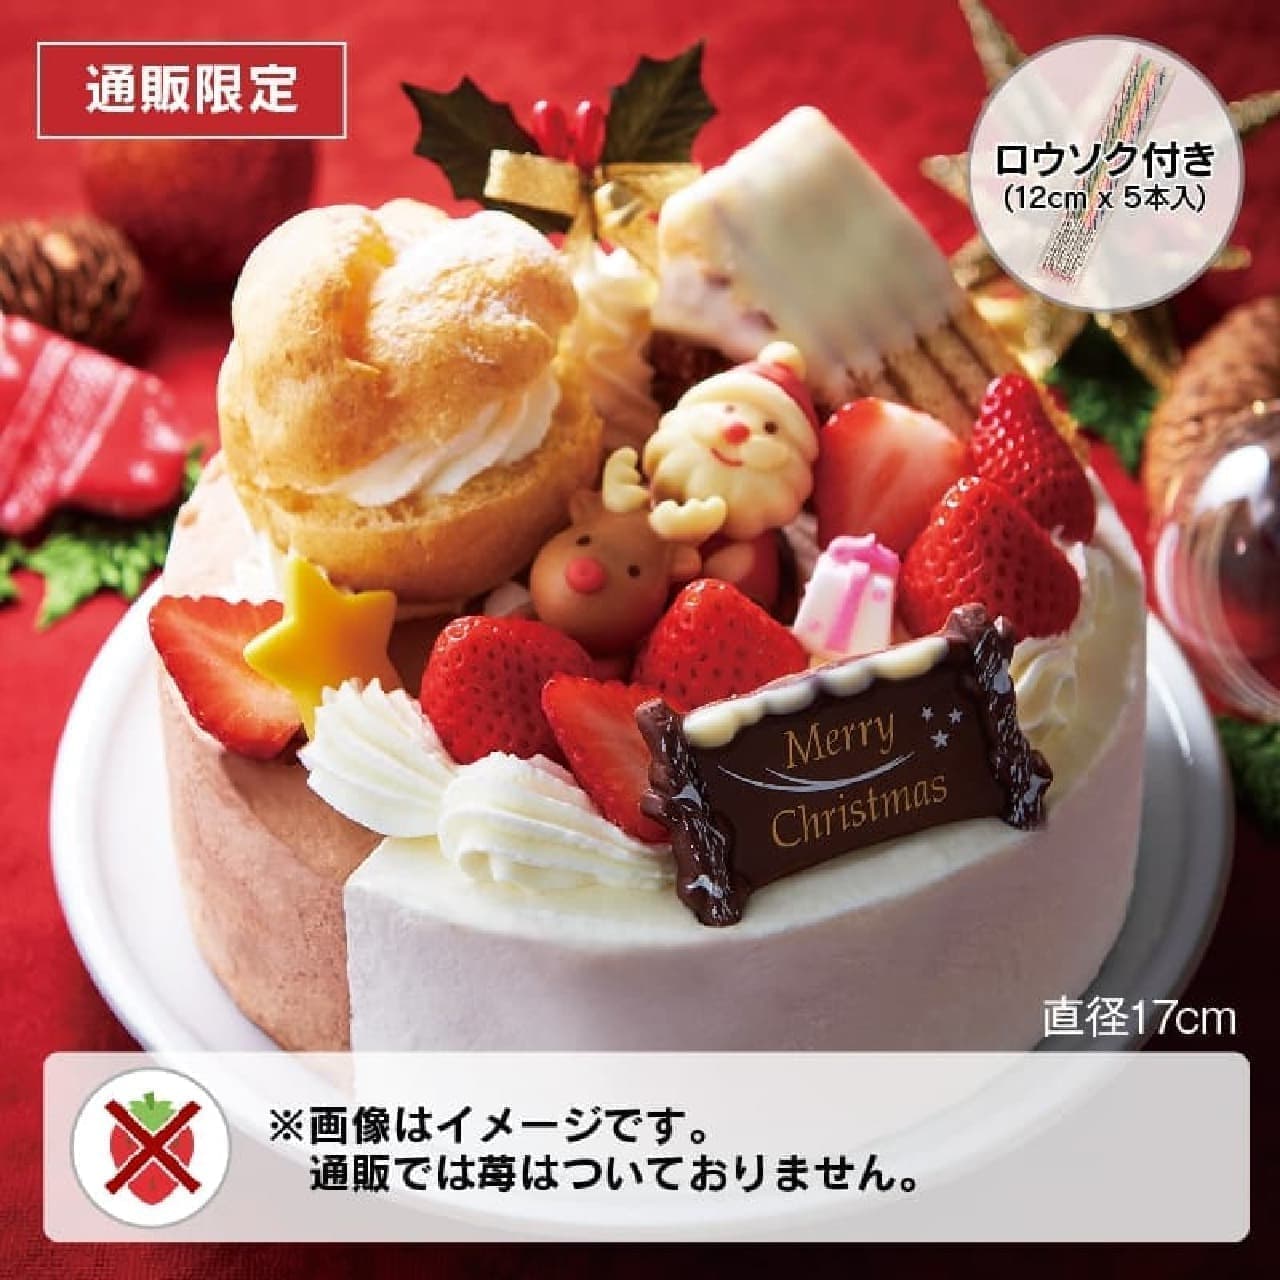 Chateraise "[Mail Order] Xmas 2-flavor Decoration 17cm (without Strawberry)